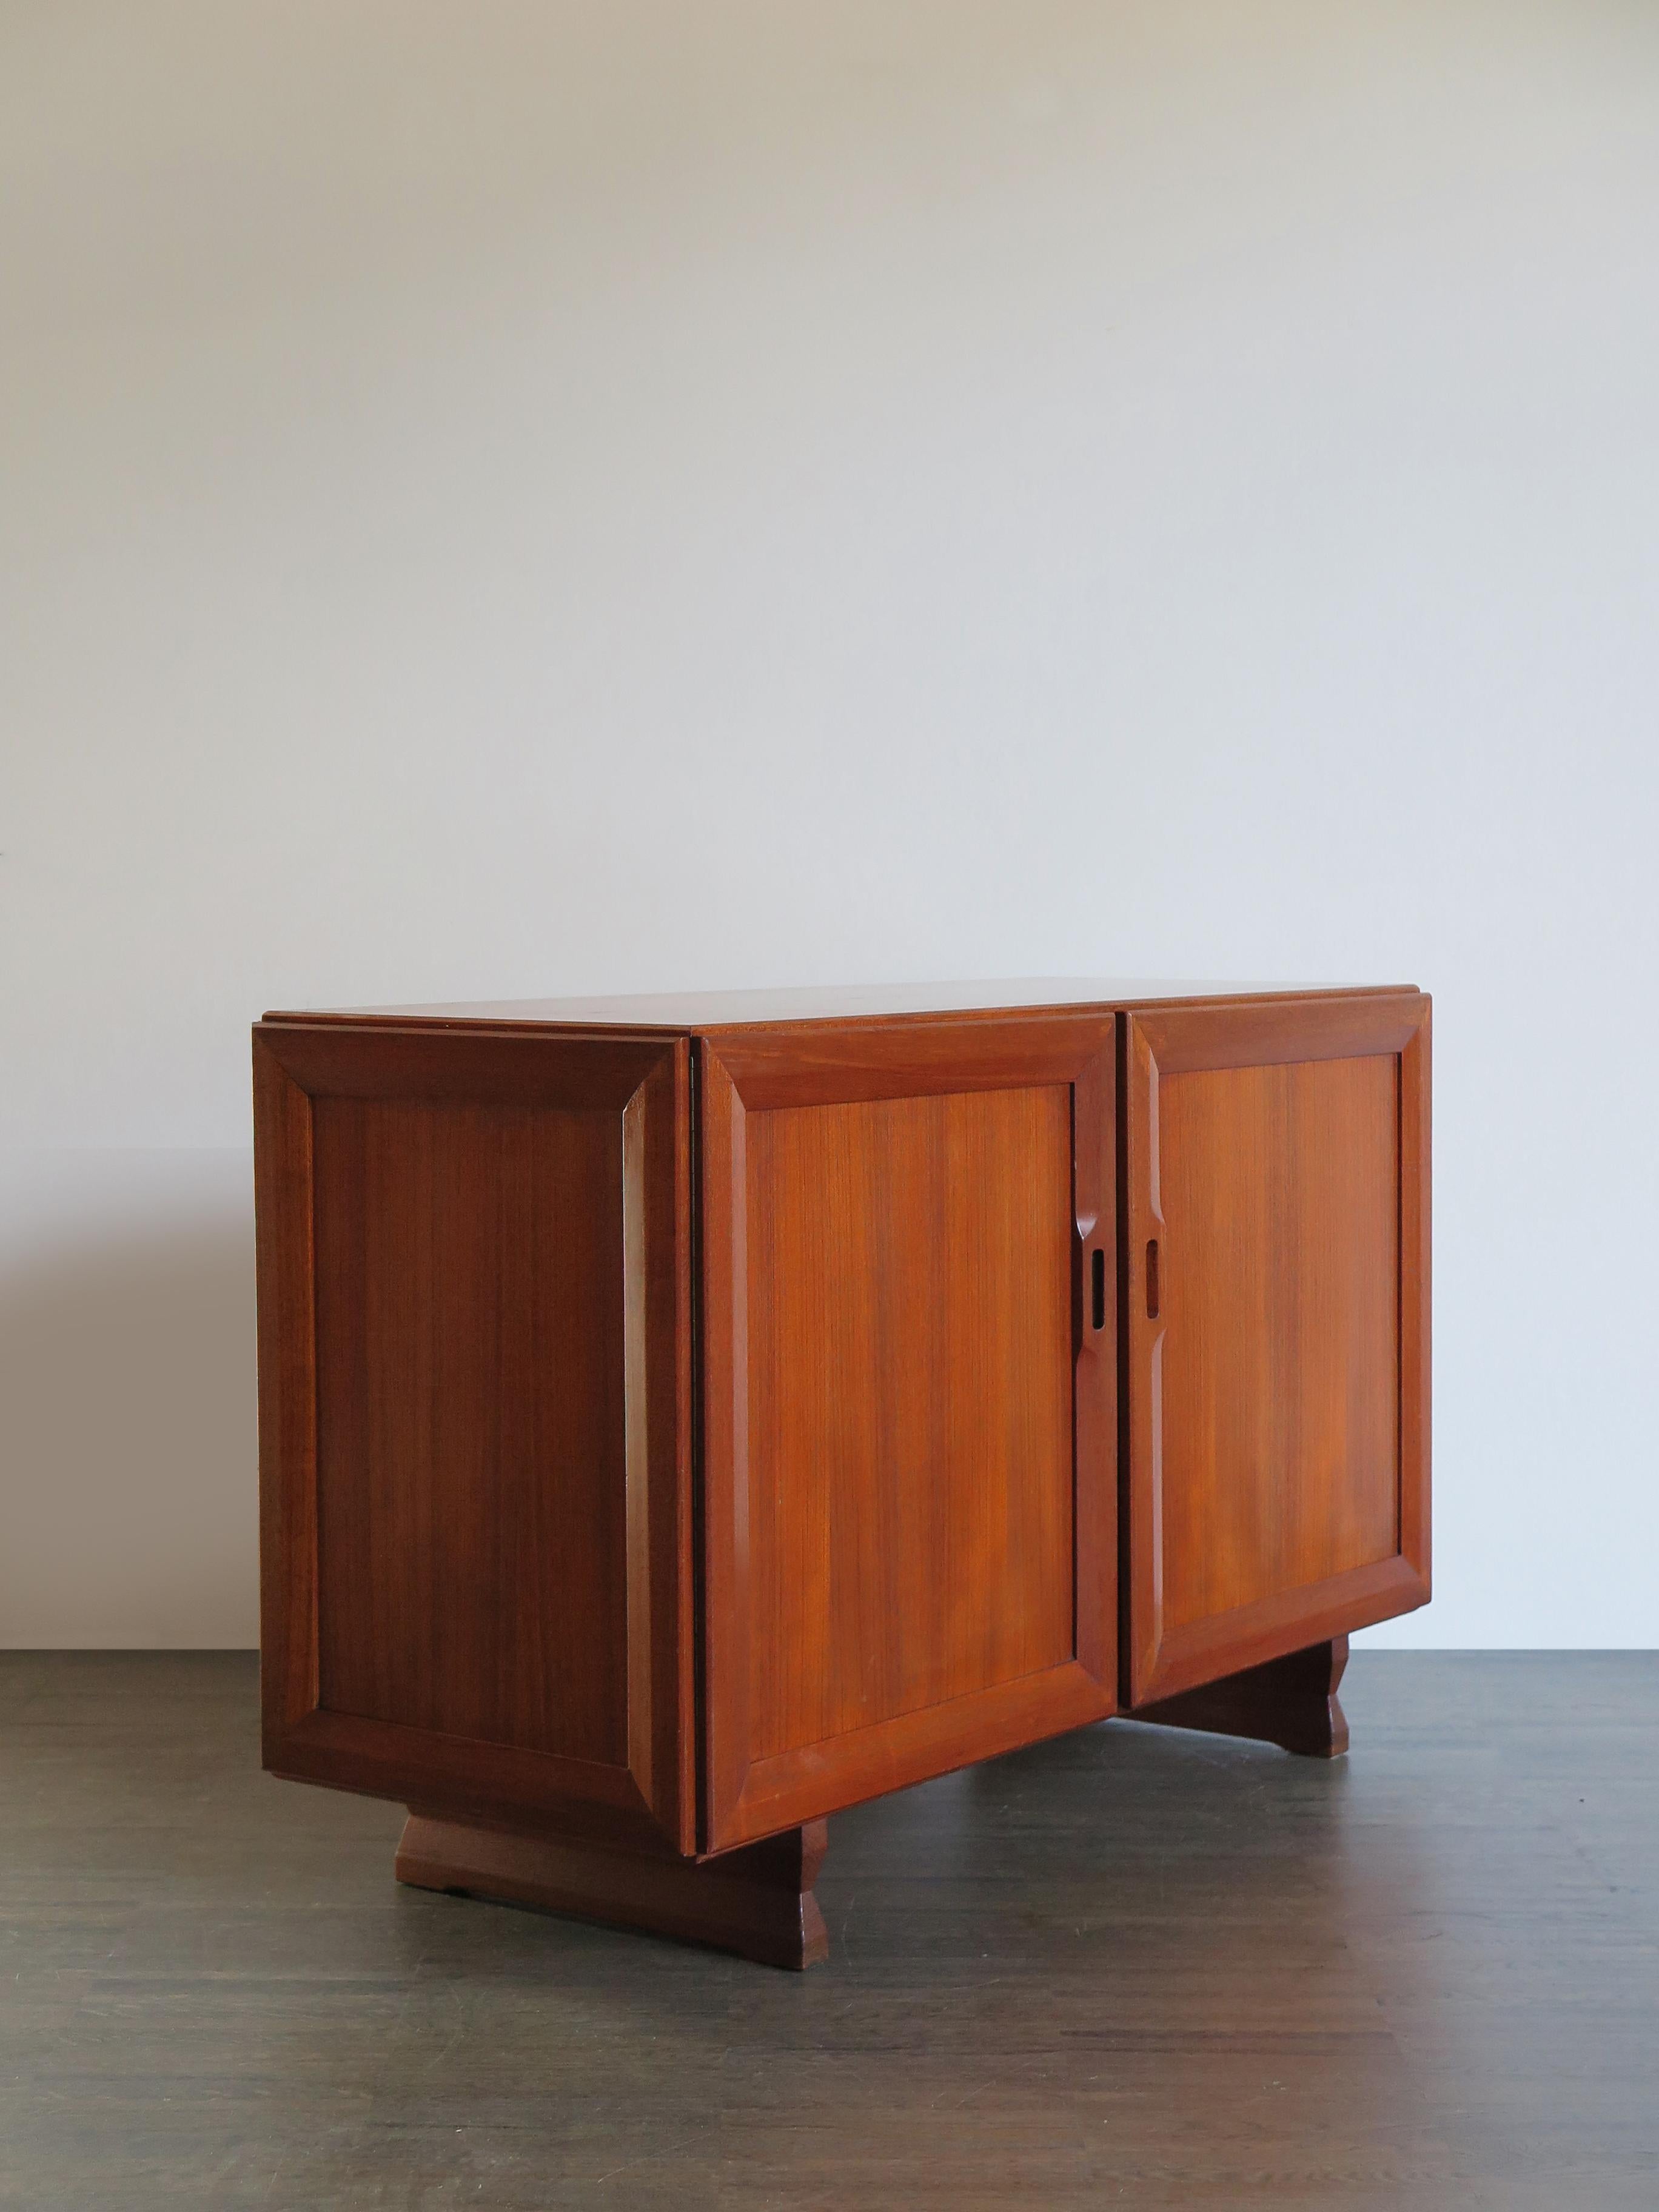 Italian wood sideboard designed by Franco Albini and produced by Poggi Pavia,
two-door model with wood veneer, feet, door frames and details in solid wood, 1950s

Bibliography:
G. Gramigna, Italian Design 1950 - 2000, Vol I, Turin 2003, p.